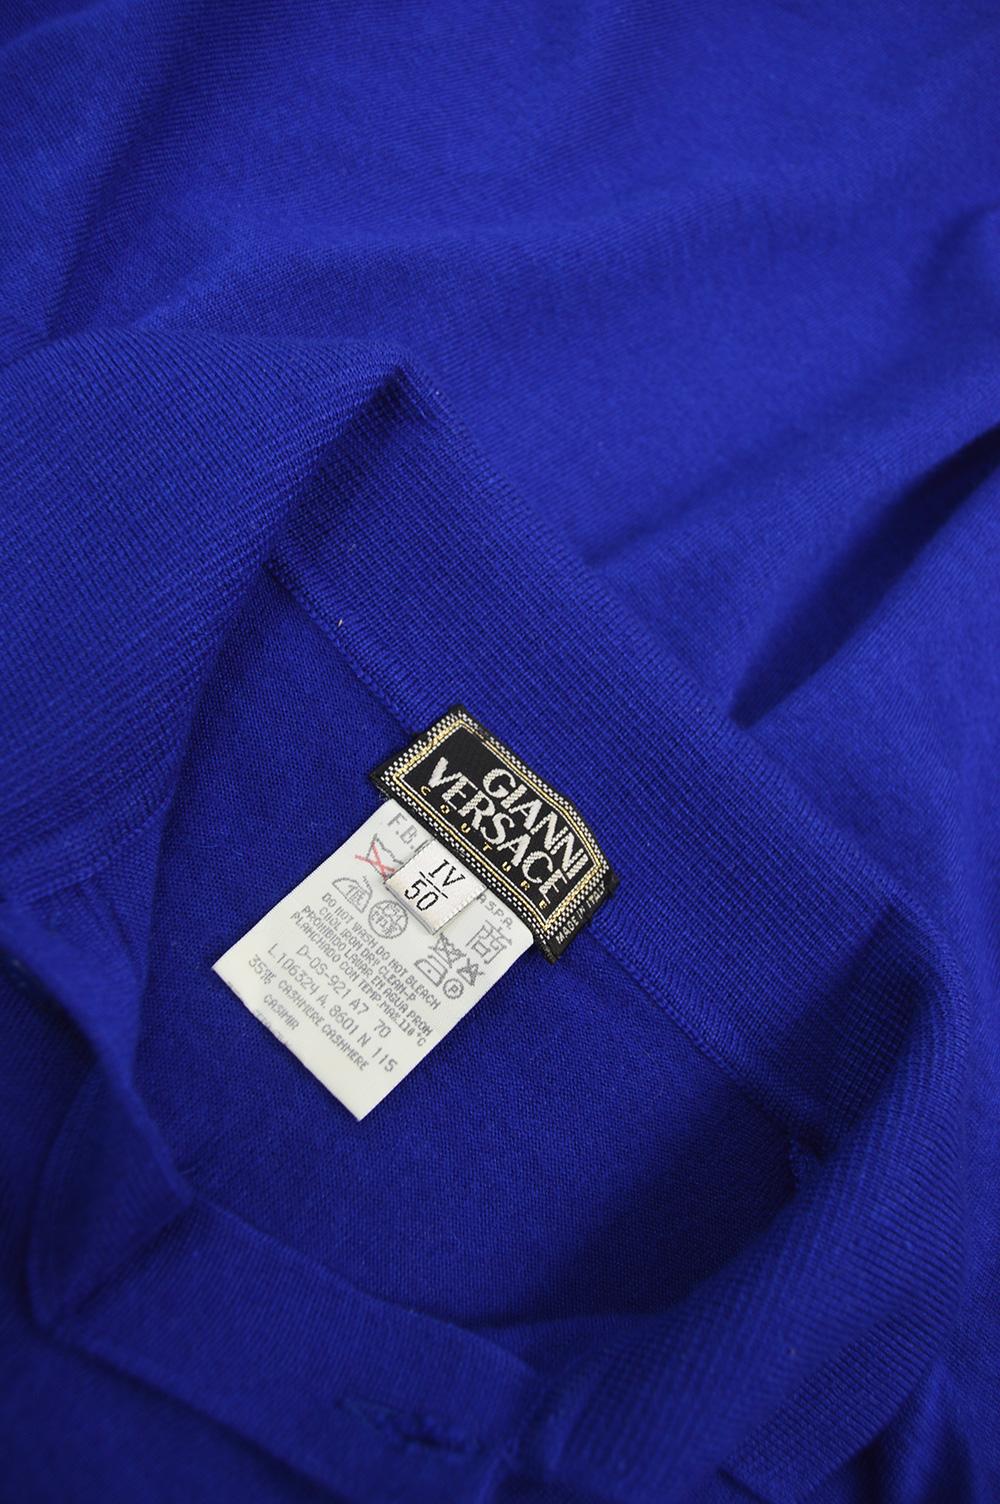 Gianni Versace Mens Cashmere & Silk Royal Blue Vintage Collared Sweater, 1990s  For Sale 2